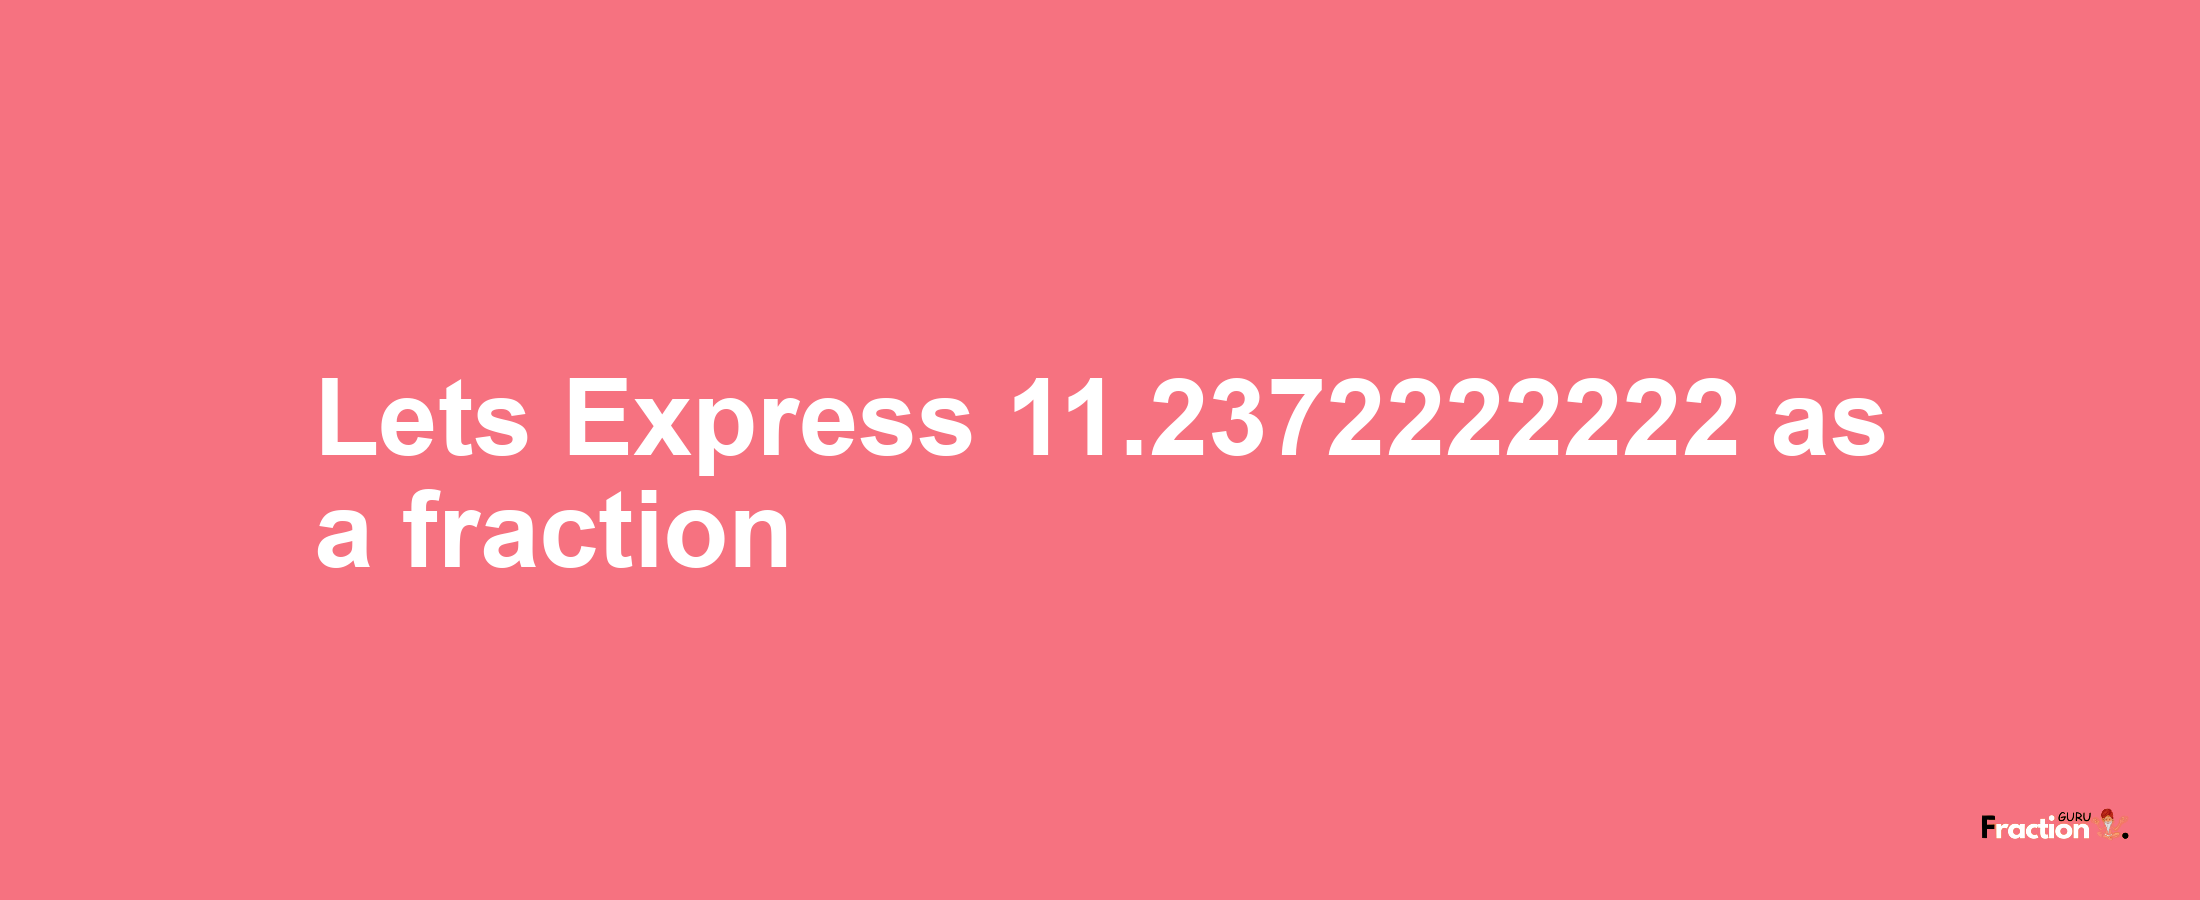 Lets Express 11.2372222222 as afraction